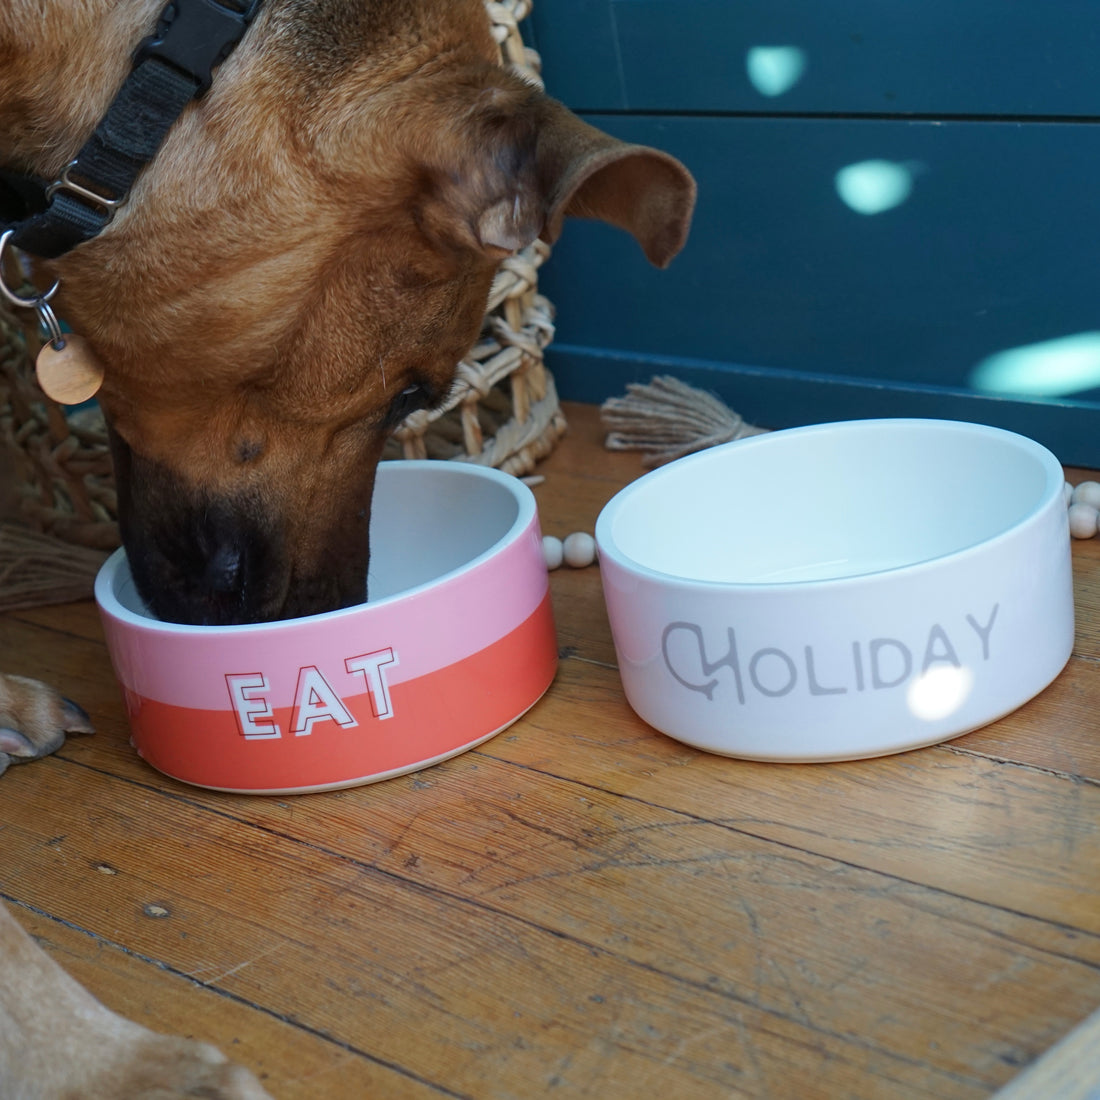 Watercolor Personalized Small Dog Bowls